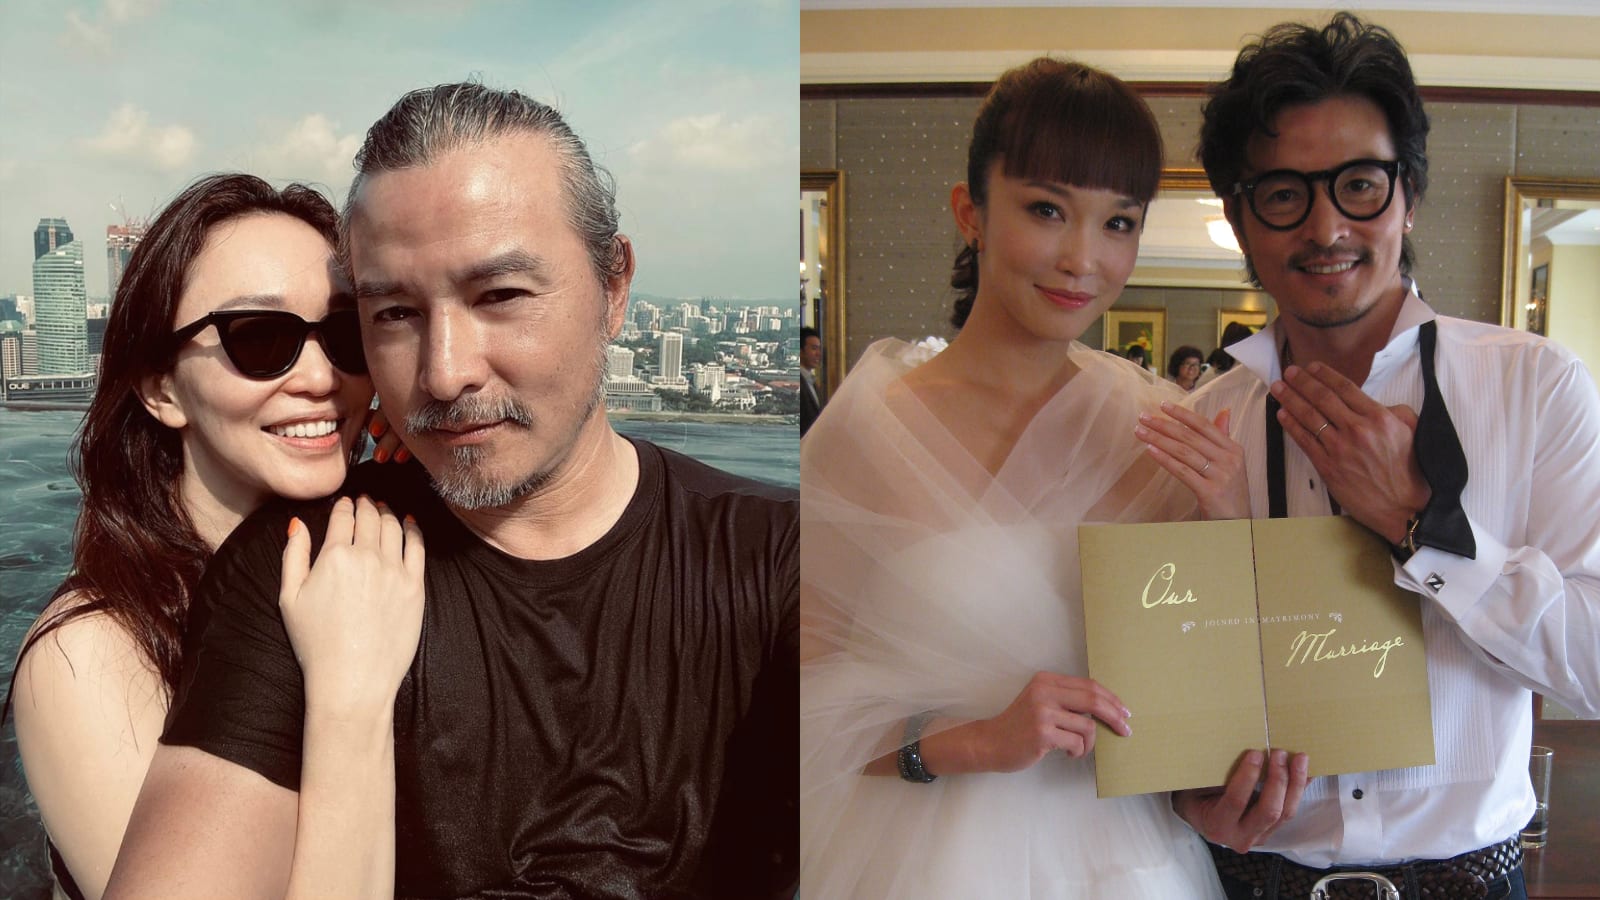 Christopher Lee Reveals Why It Was “So Difficult” To Propose To Fann Wong